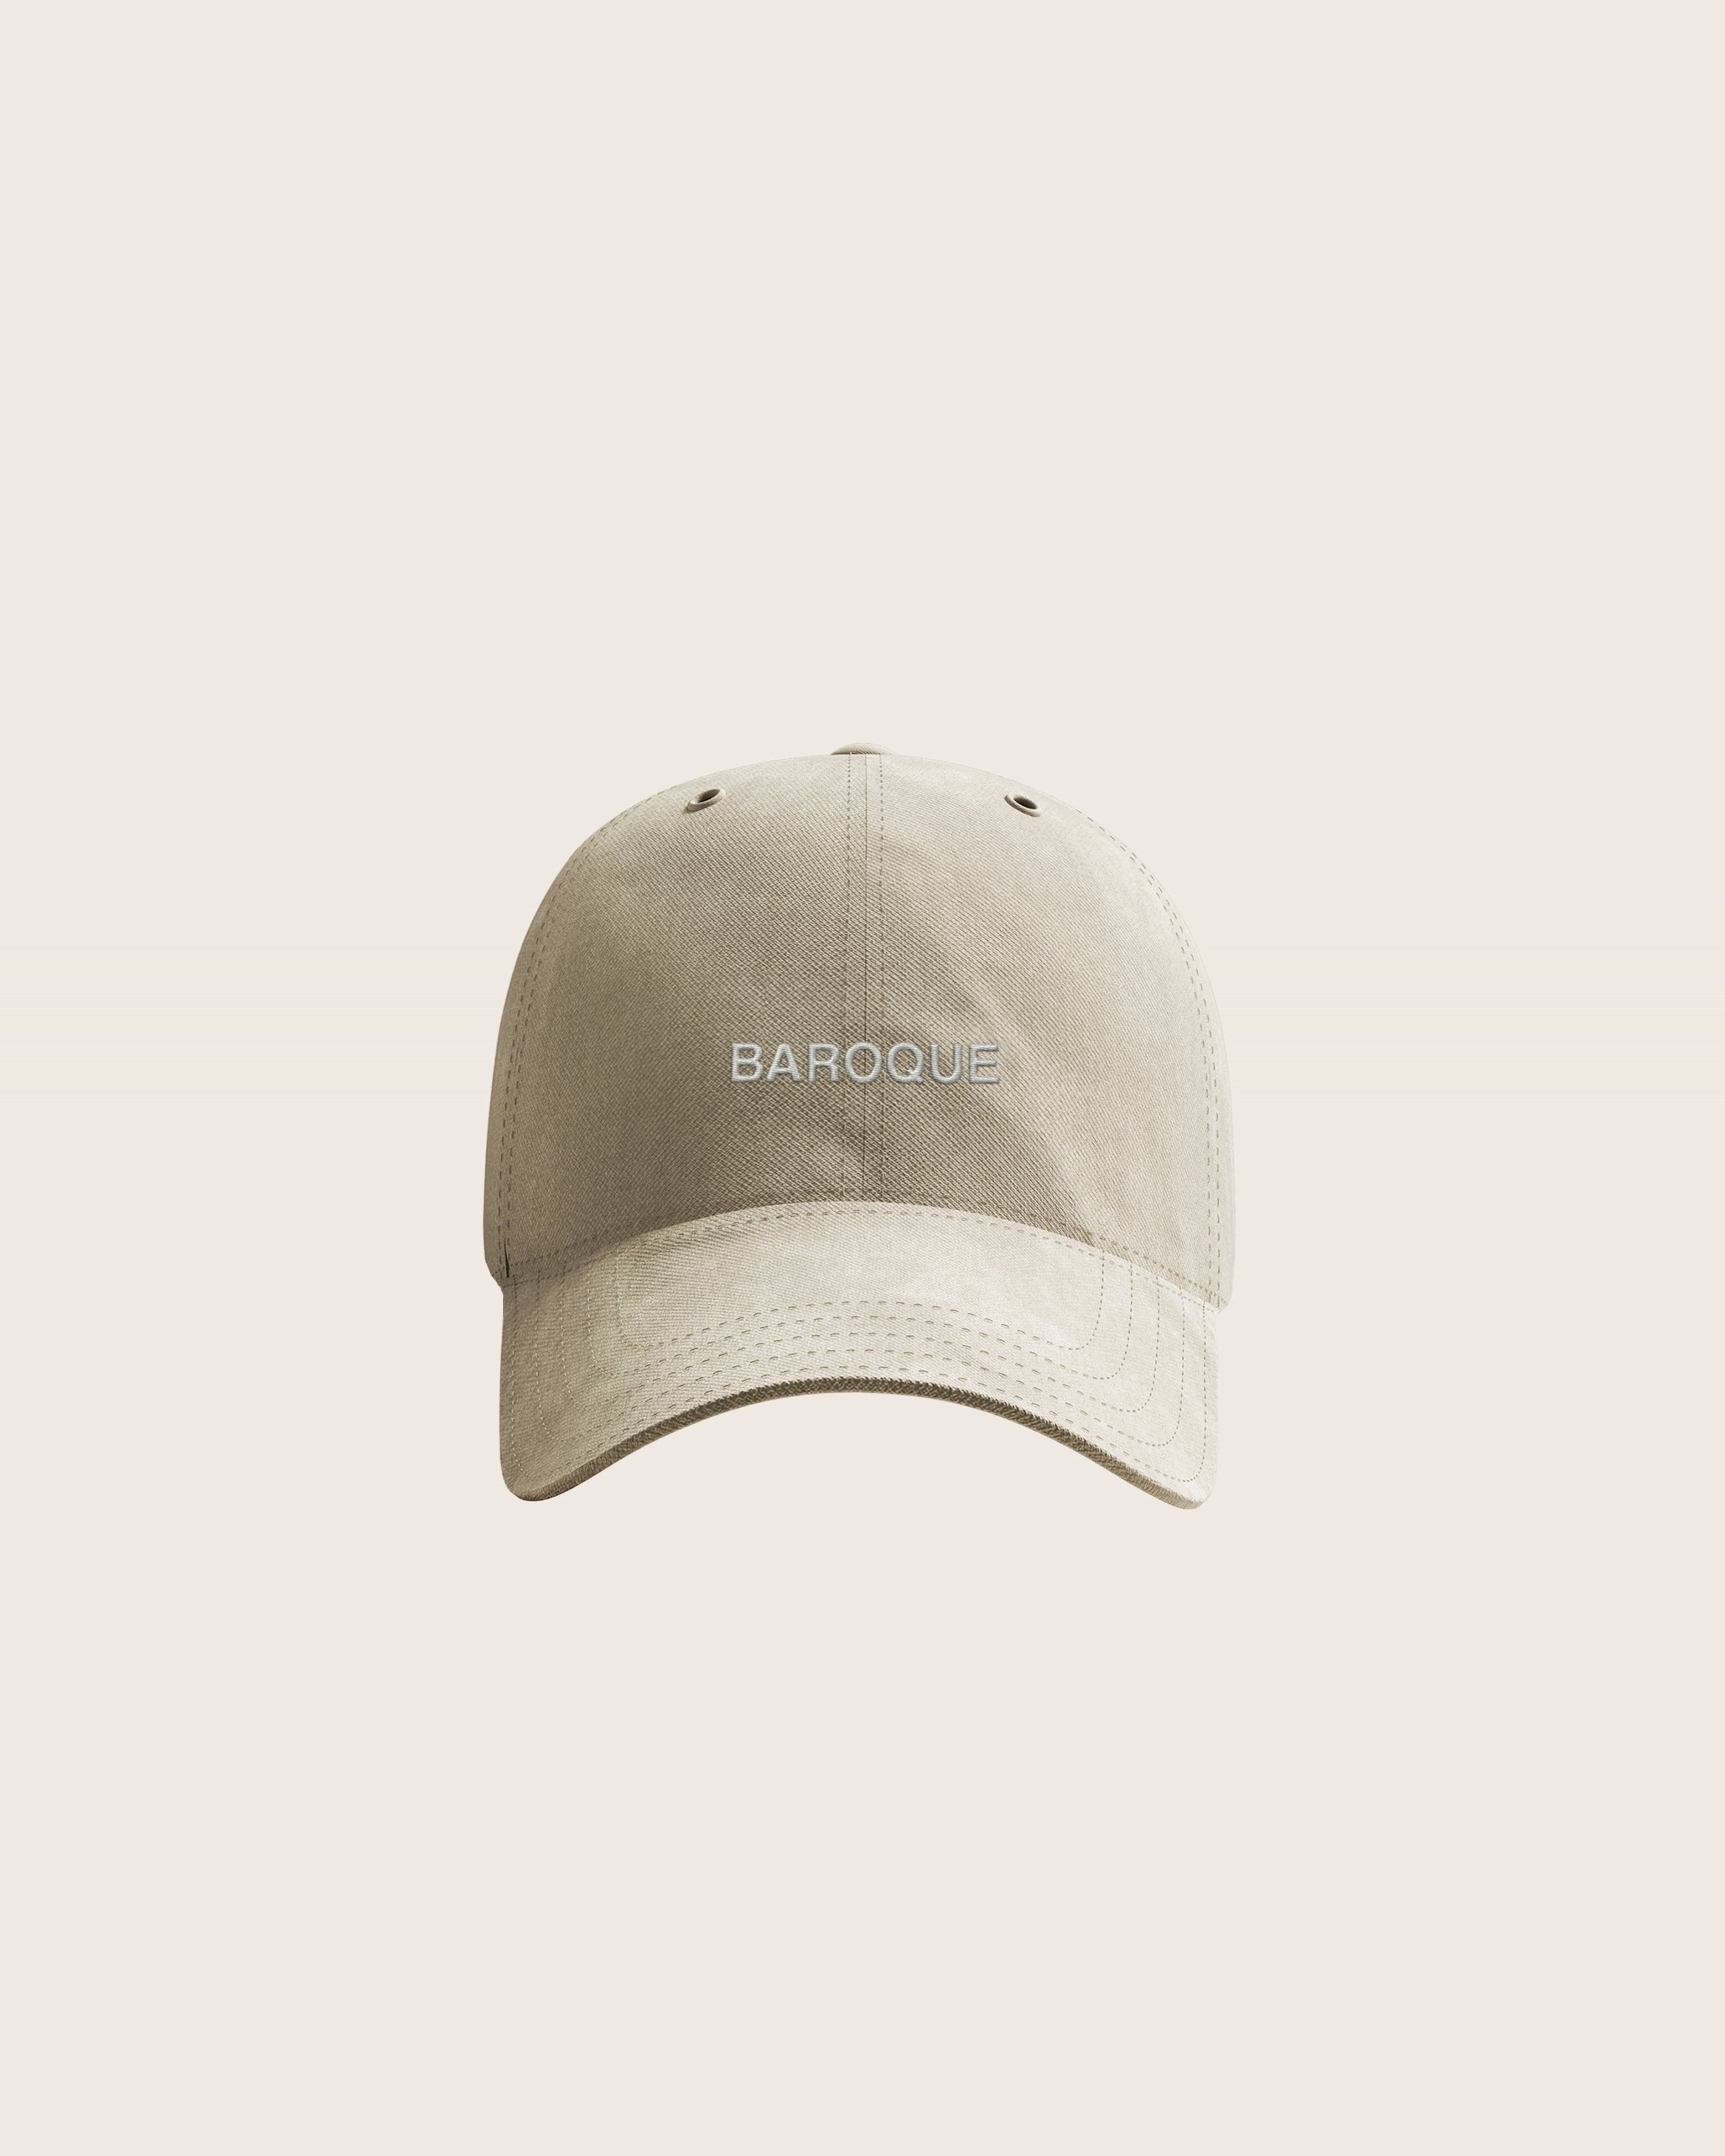 Khaki Baseball Cap / Dad Hat with Baroque Art Movement Text Embroidery on Front. 100% Cotton.